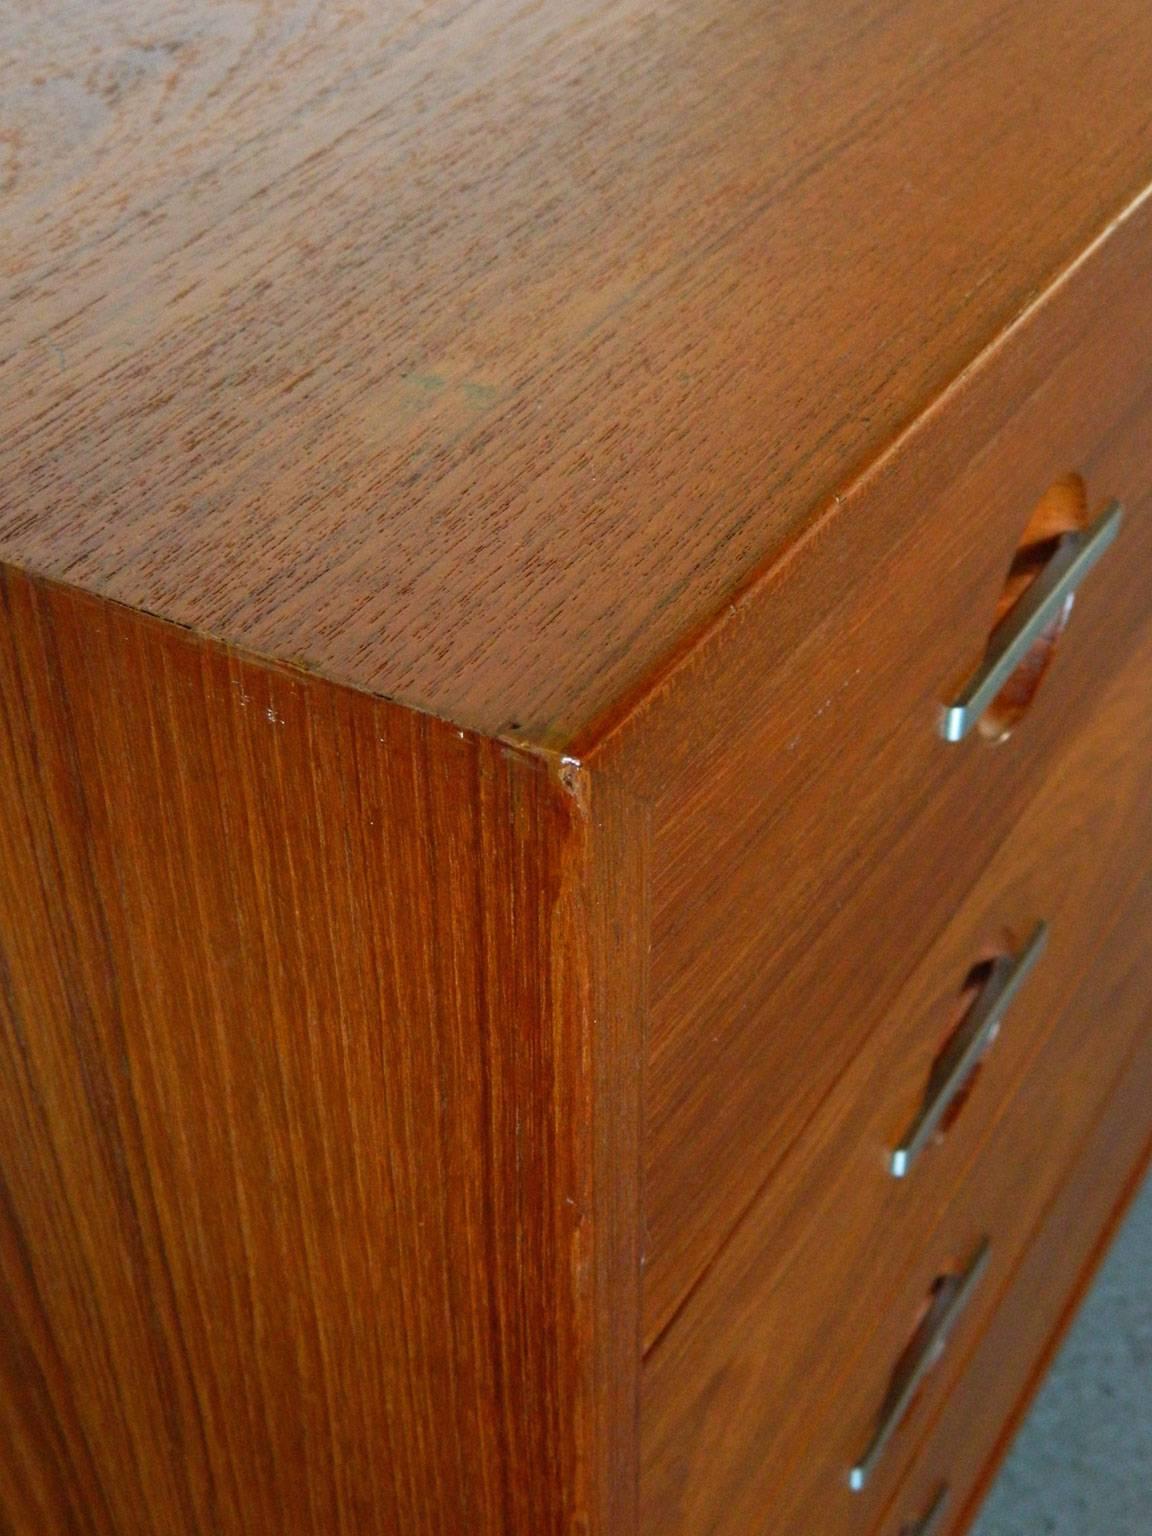 Handsome teak chest of drawers designed by Danish designer Hans Wegner for RY Mobler in the 1970s. Metal hardware, teak legs, and a finished back are some of the beautiful details of this piece. 